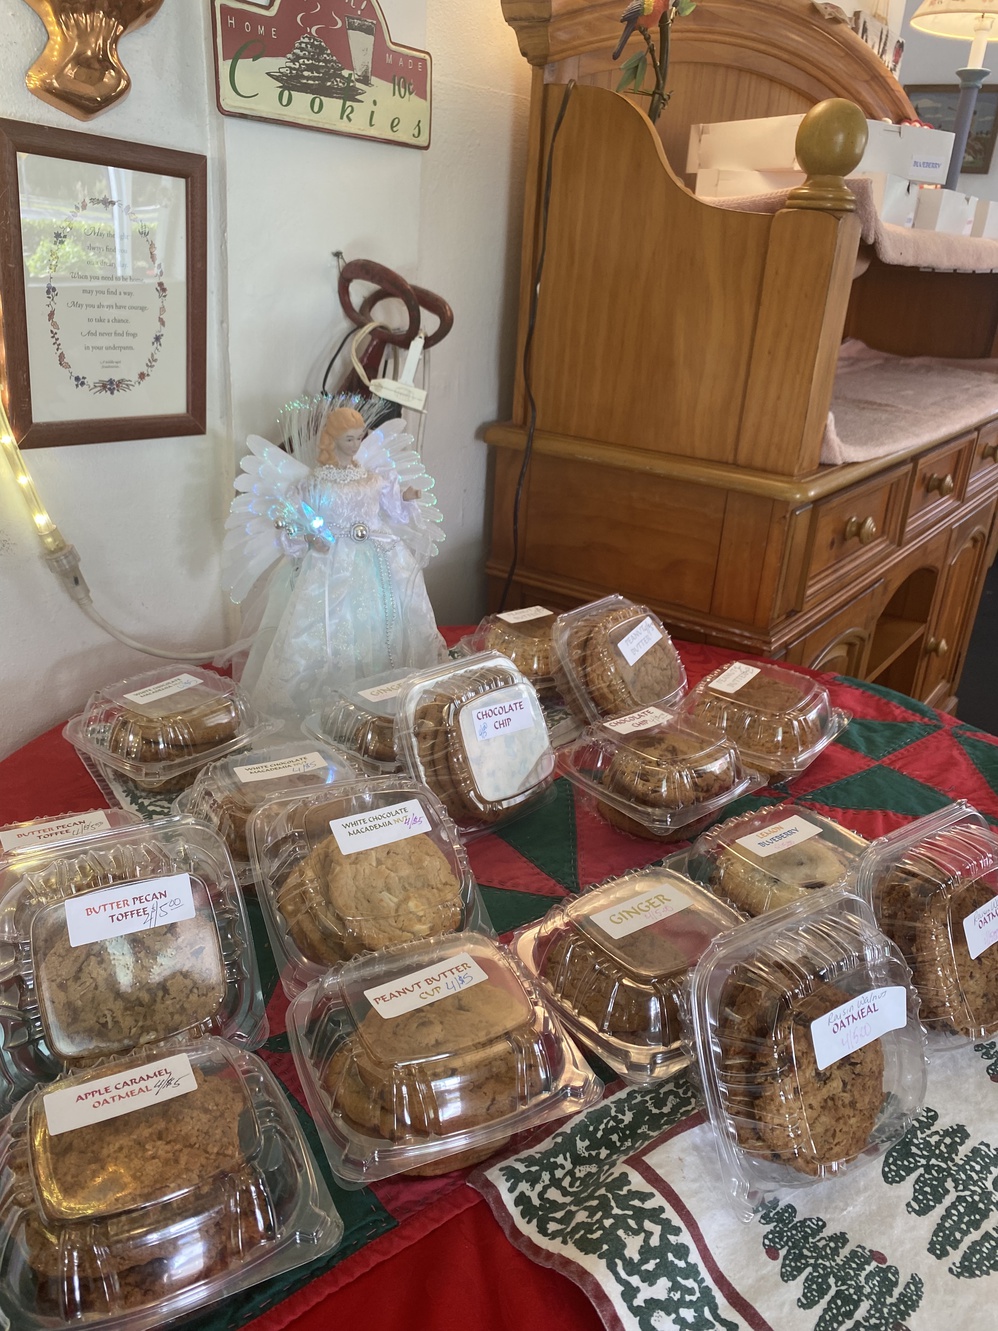 Dolly's has a half-dozen varieties of cookies for sale here.